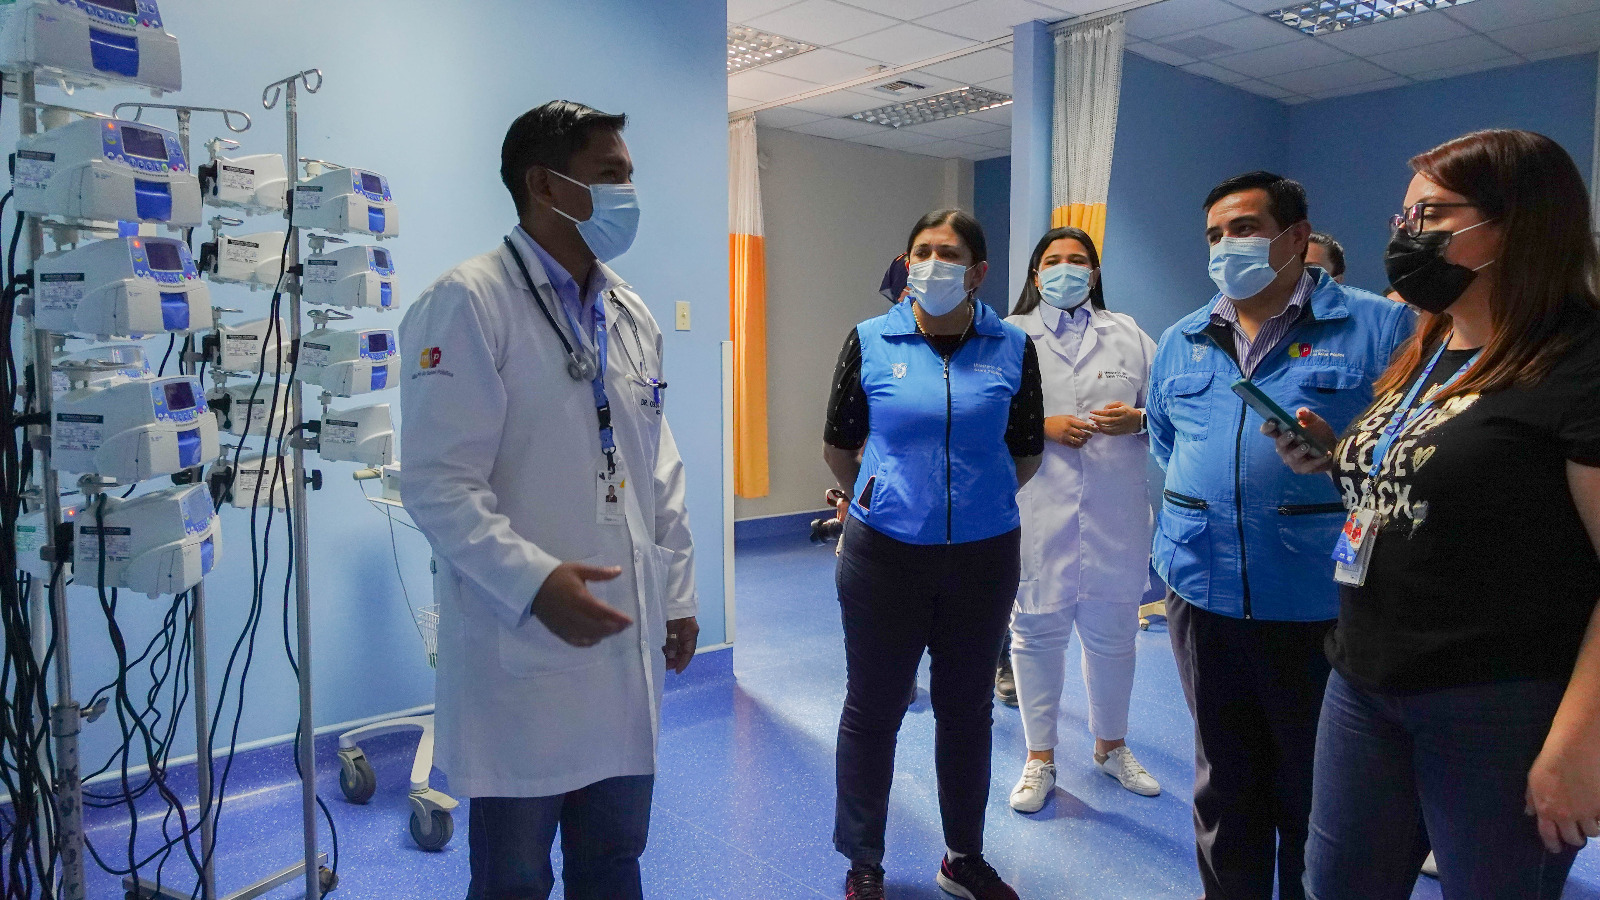 Medical specialties at the Chillanes Hospital in Bolívar are strengthened – Ministry of Public Health